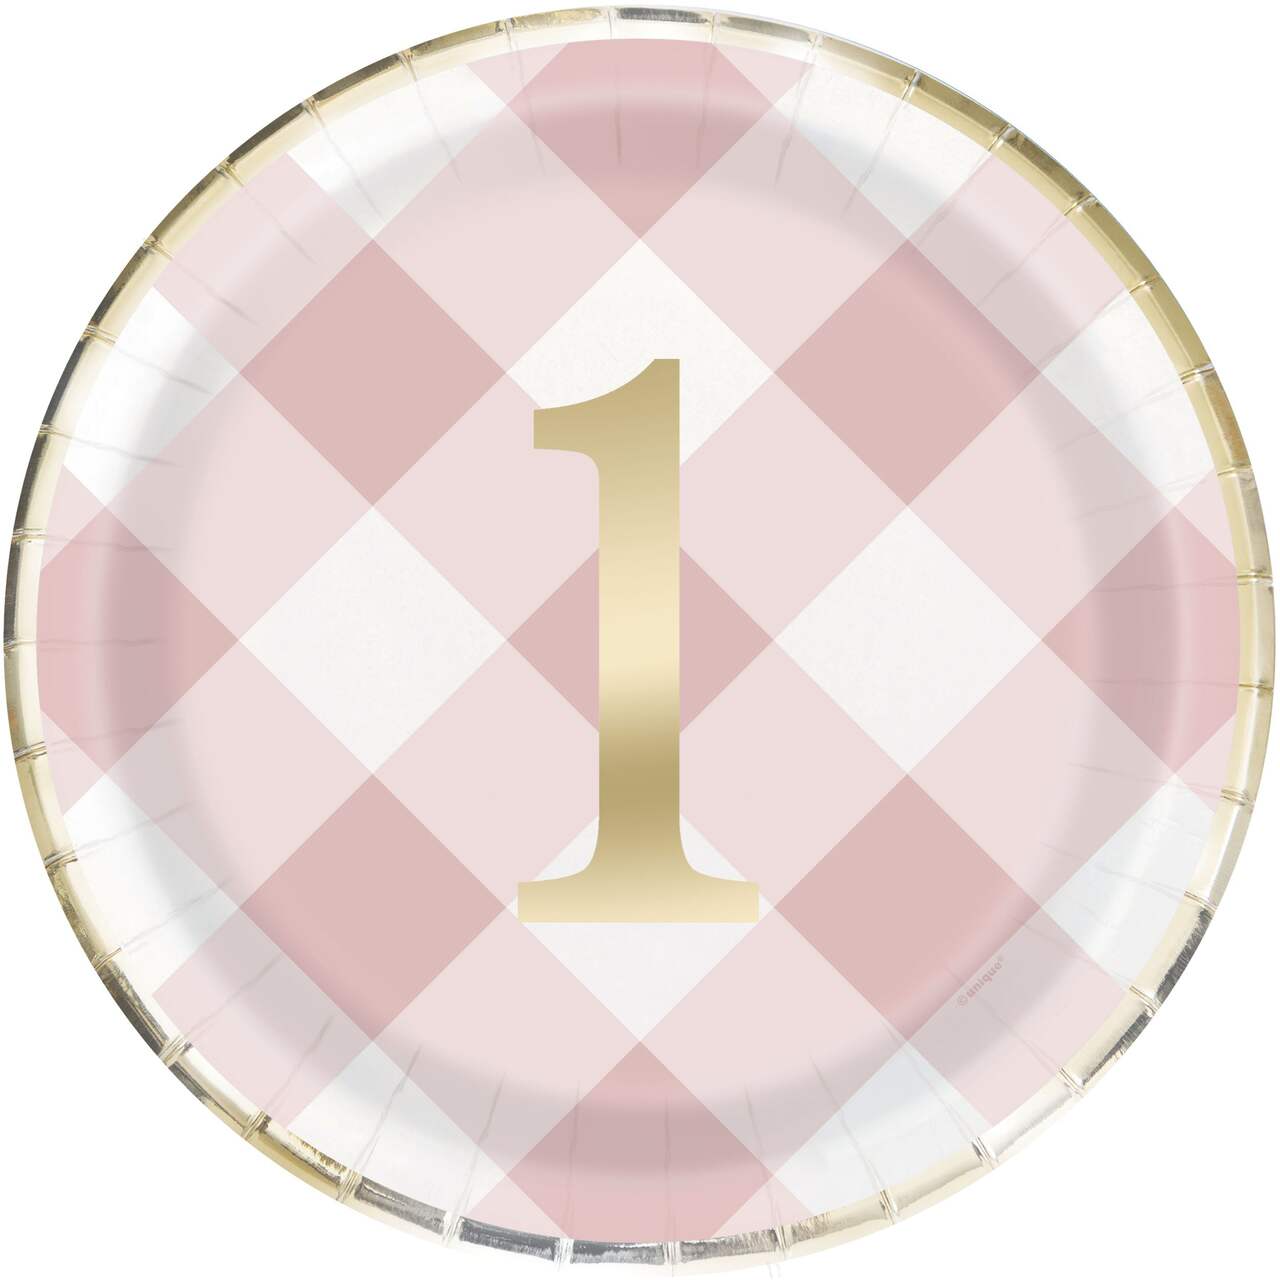 Gingham 1st Birthday Party Paper Plate, Pink, 8-pk